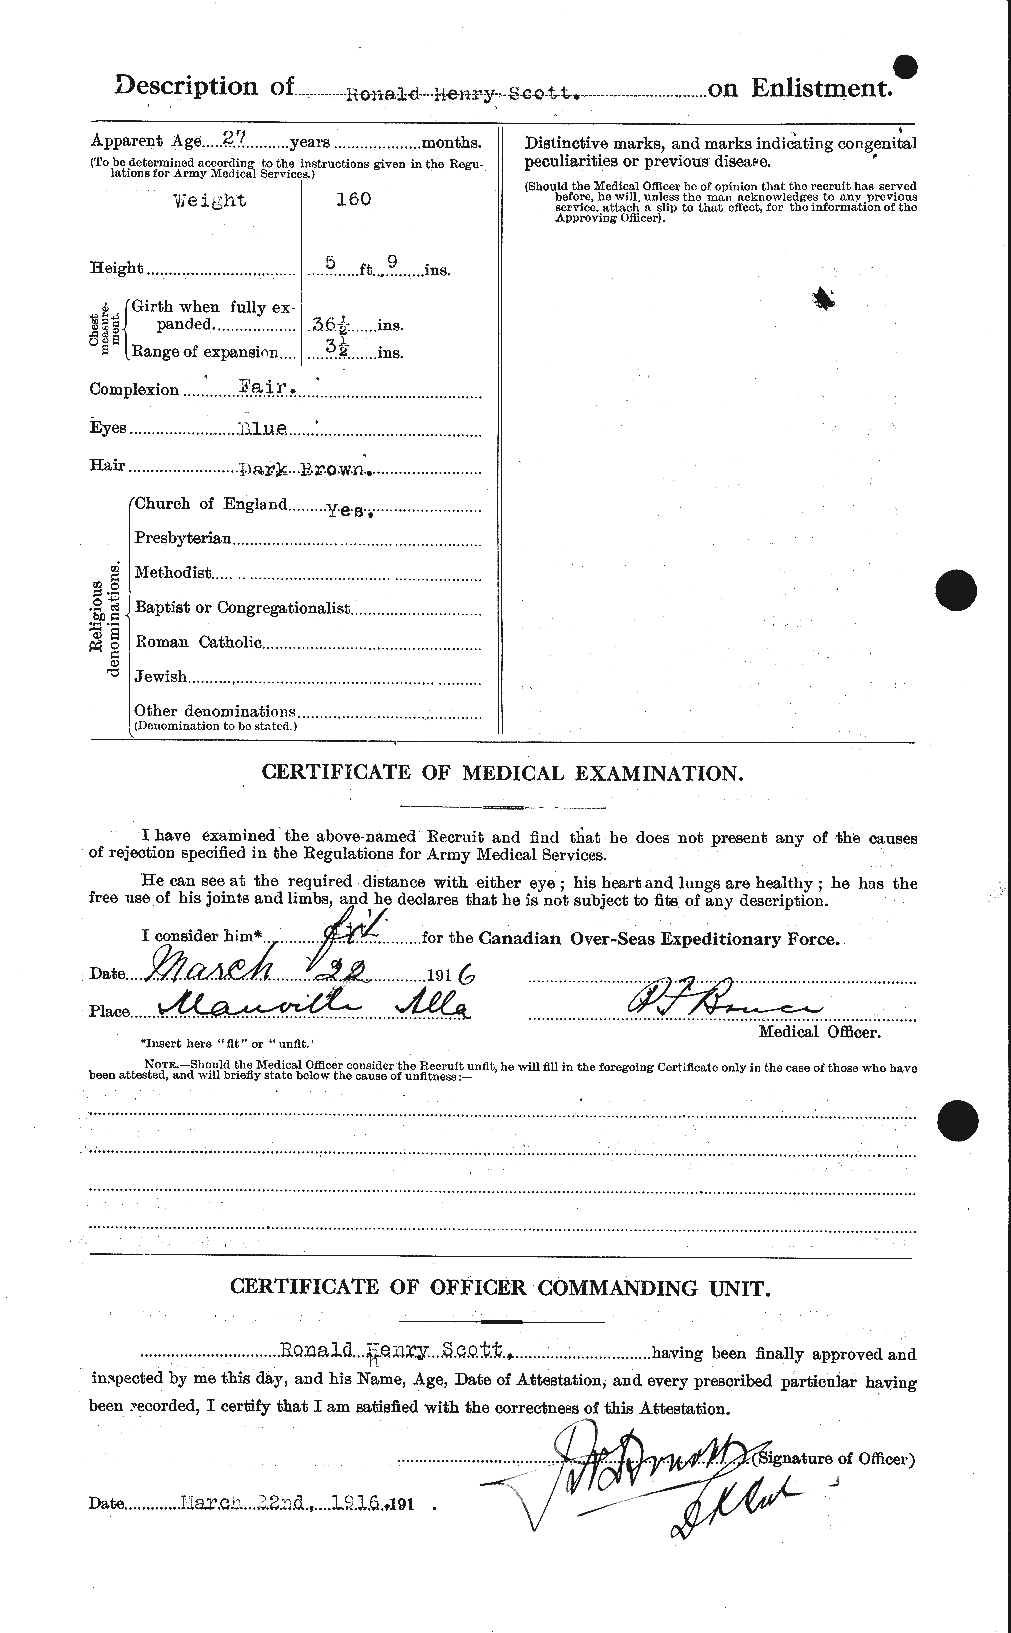 Personnel Records of the First World War - CEF 089109b